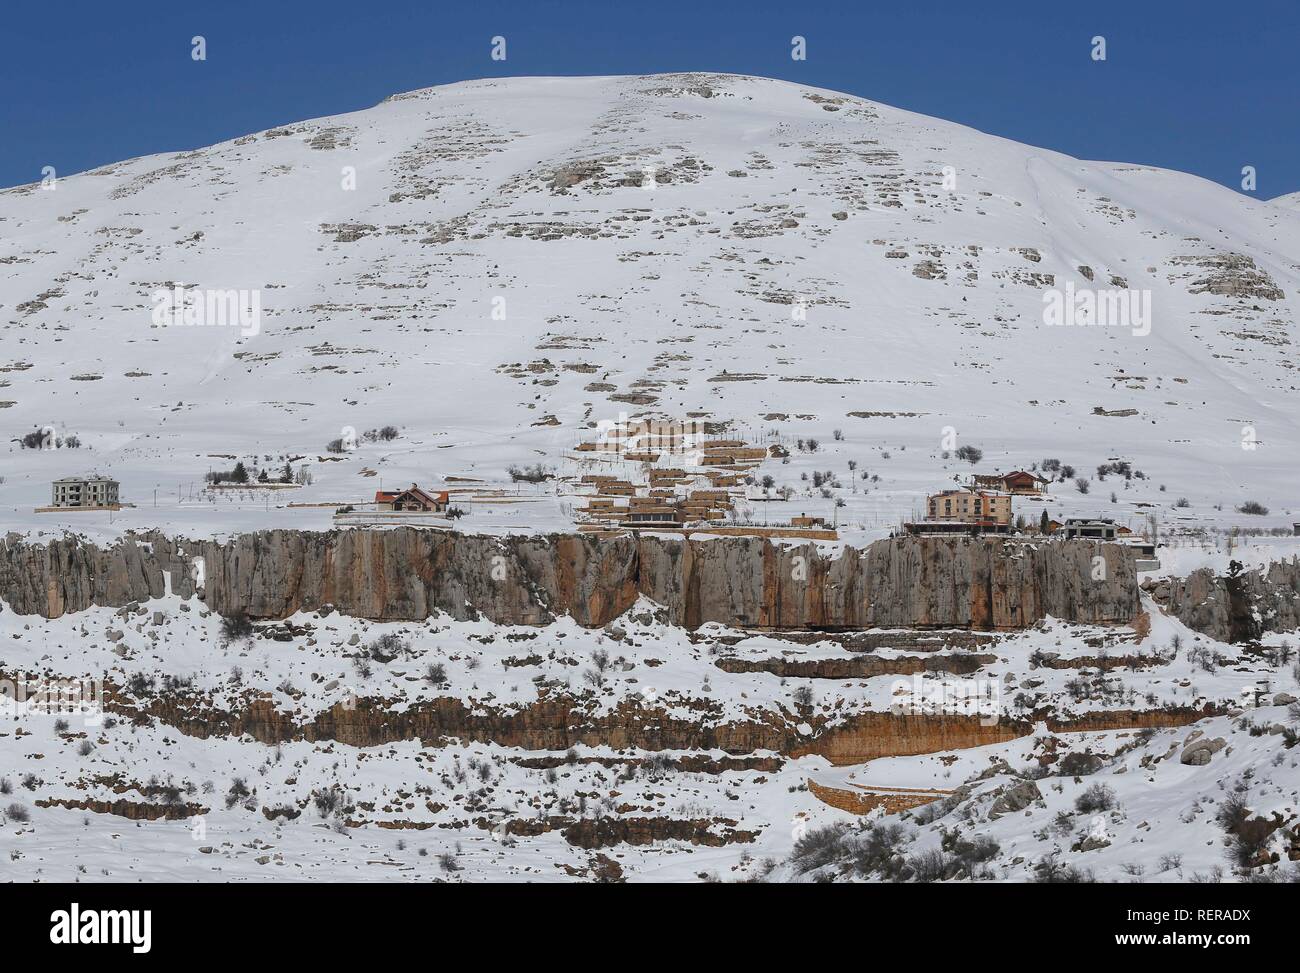 (190122) -- BEIRUT, Jan. 22, 2019 (Xinhua) -- Photo taken on Jan. 22, 2019 shows the snow-covered Faraya, a resort town in Lebanon. The storms hit Lebanon in the past month, bringing snow to several towns and areas lying 700 meters or more above sea level. (Xinhua/Bilal Jawich) Stock Photo